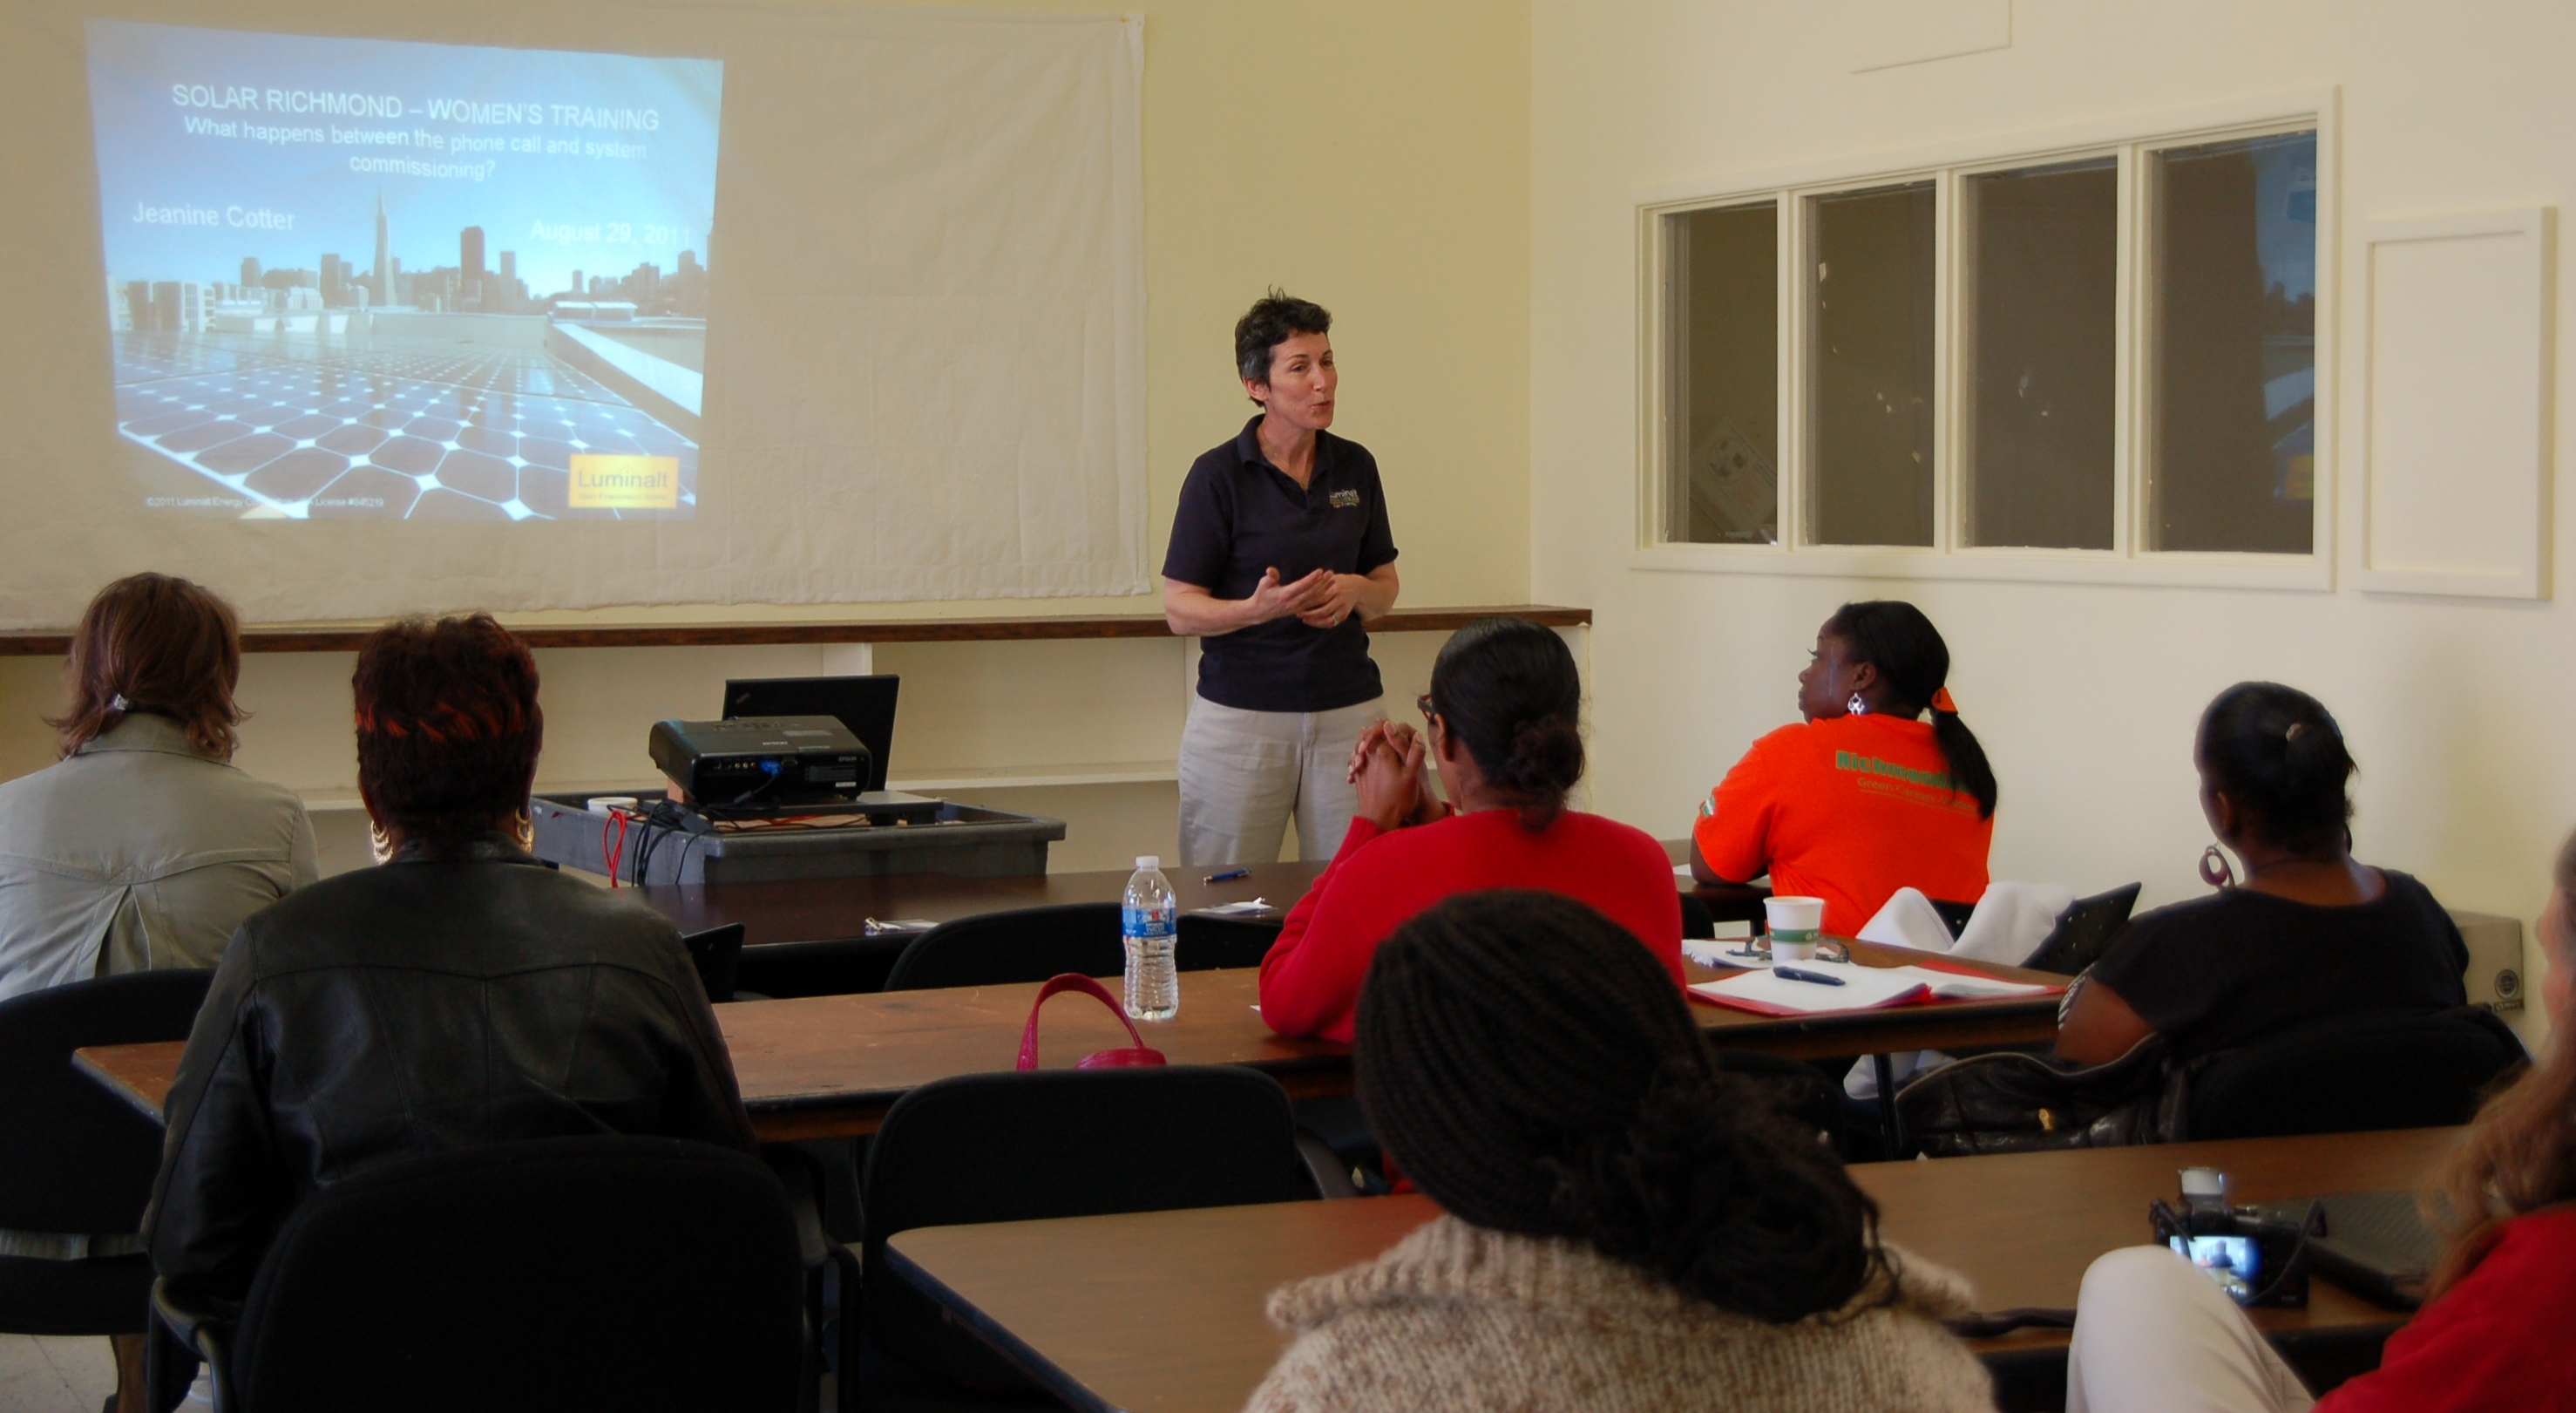 CEO Jeanine Cotter presents at Solar Richmond’s course training local women